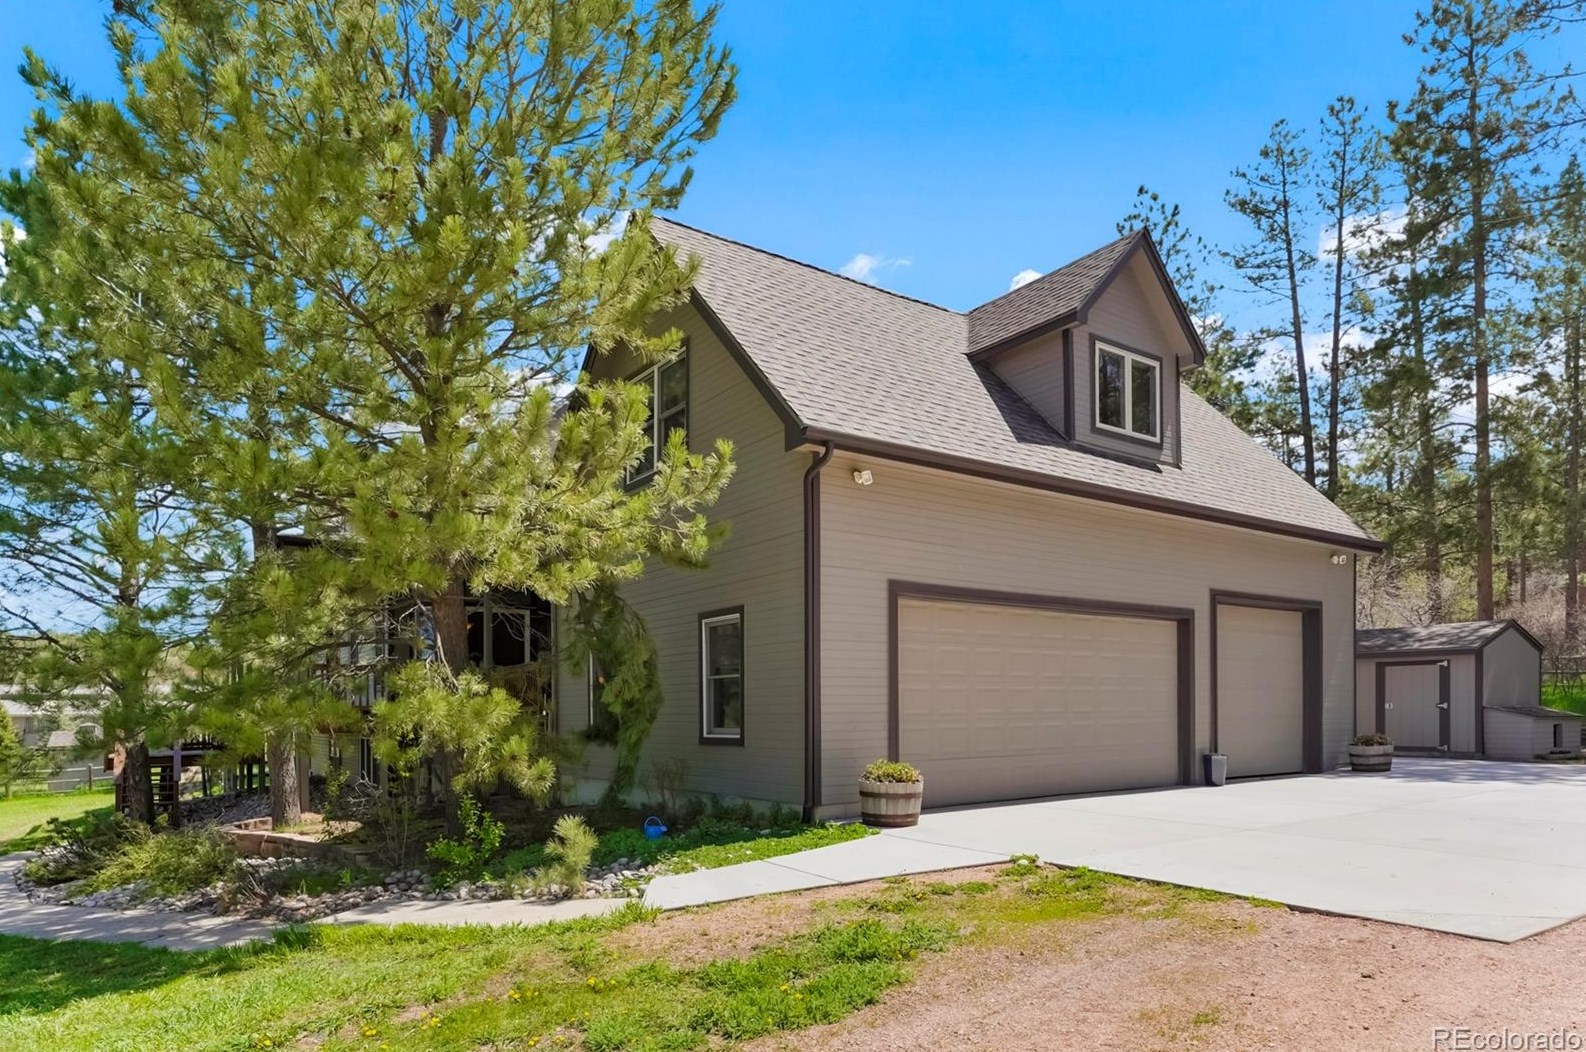 9144 Council Crossing Dr, Franktown, CO 80116